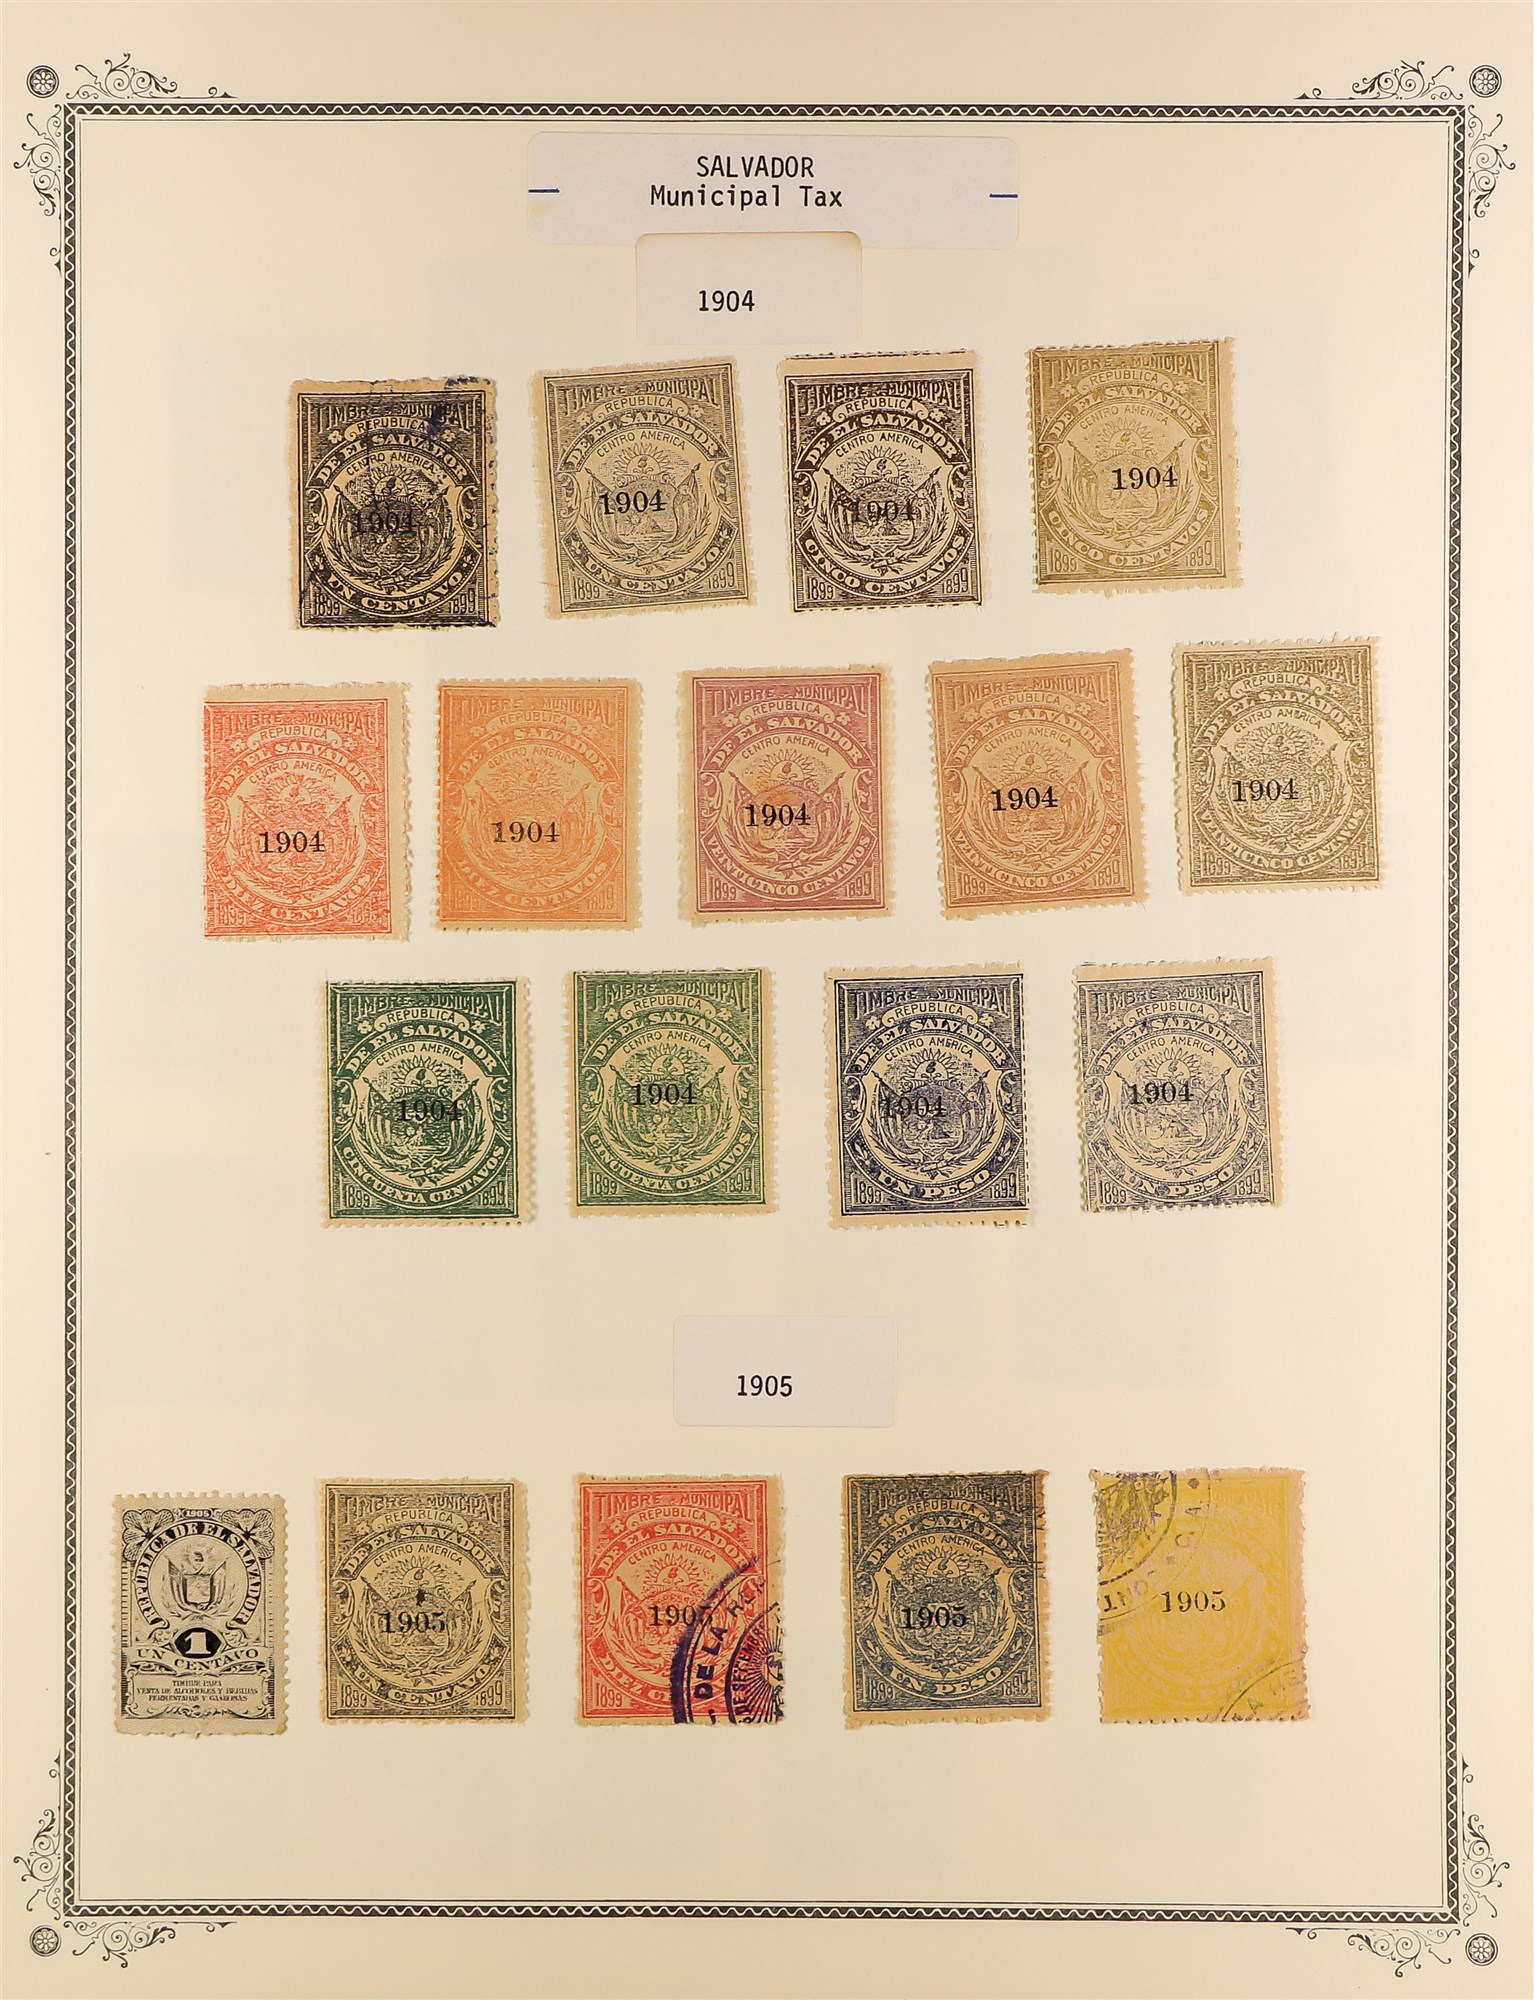 EL SALVADOR REVENUE STAMPS 1883 - 1925 mint & used collection of over 400 revenue stamps, on album - Image 20 of 27